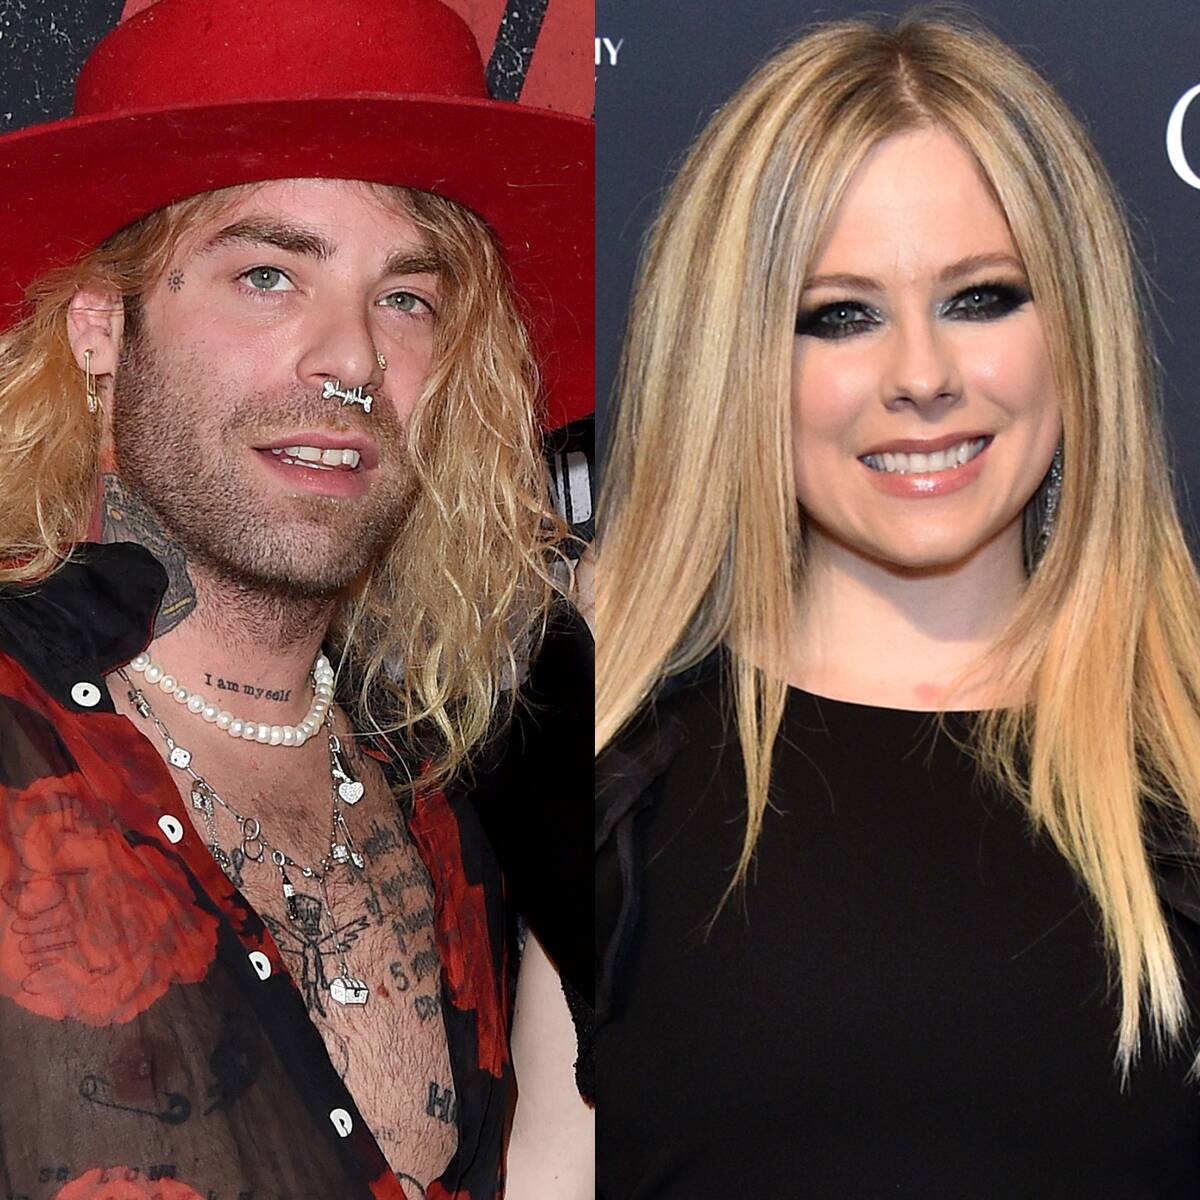 Mod Sun Gets Avril Lavigne's Name Tattooed on His Neck as Dating Rumors Heat Up